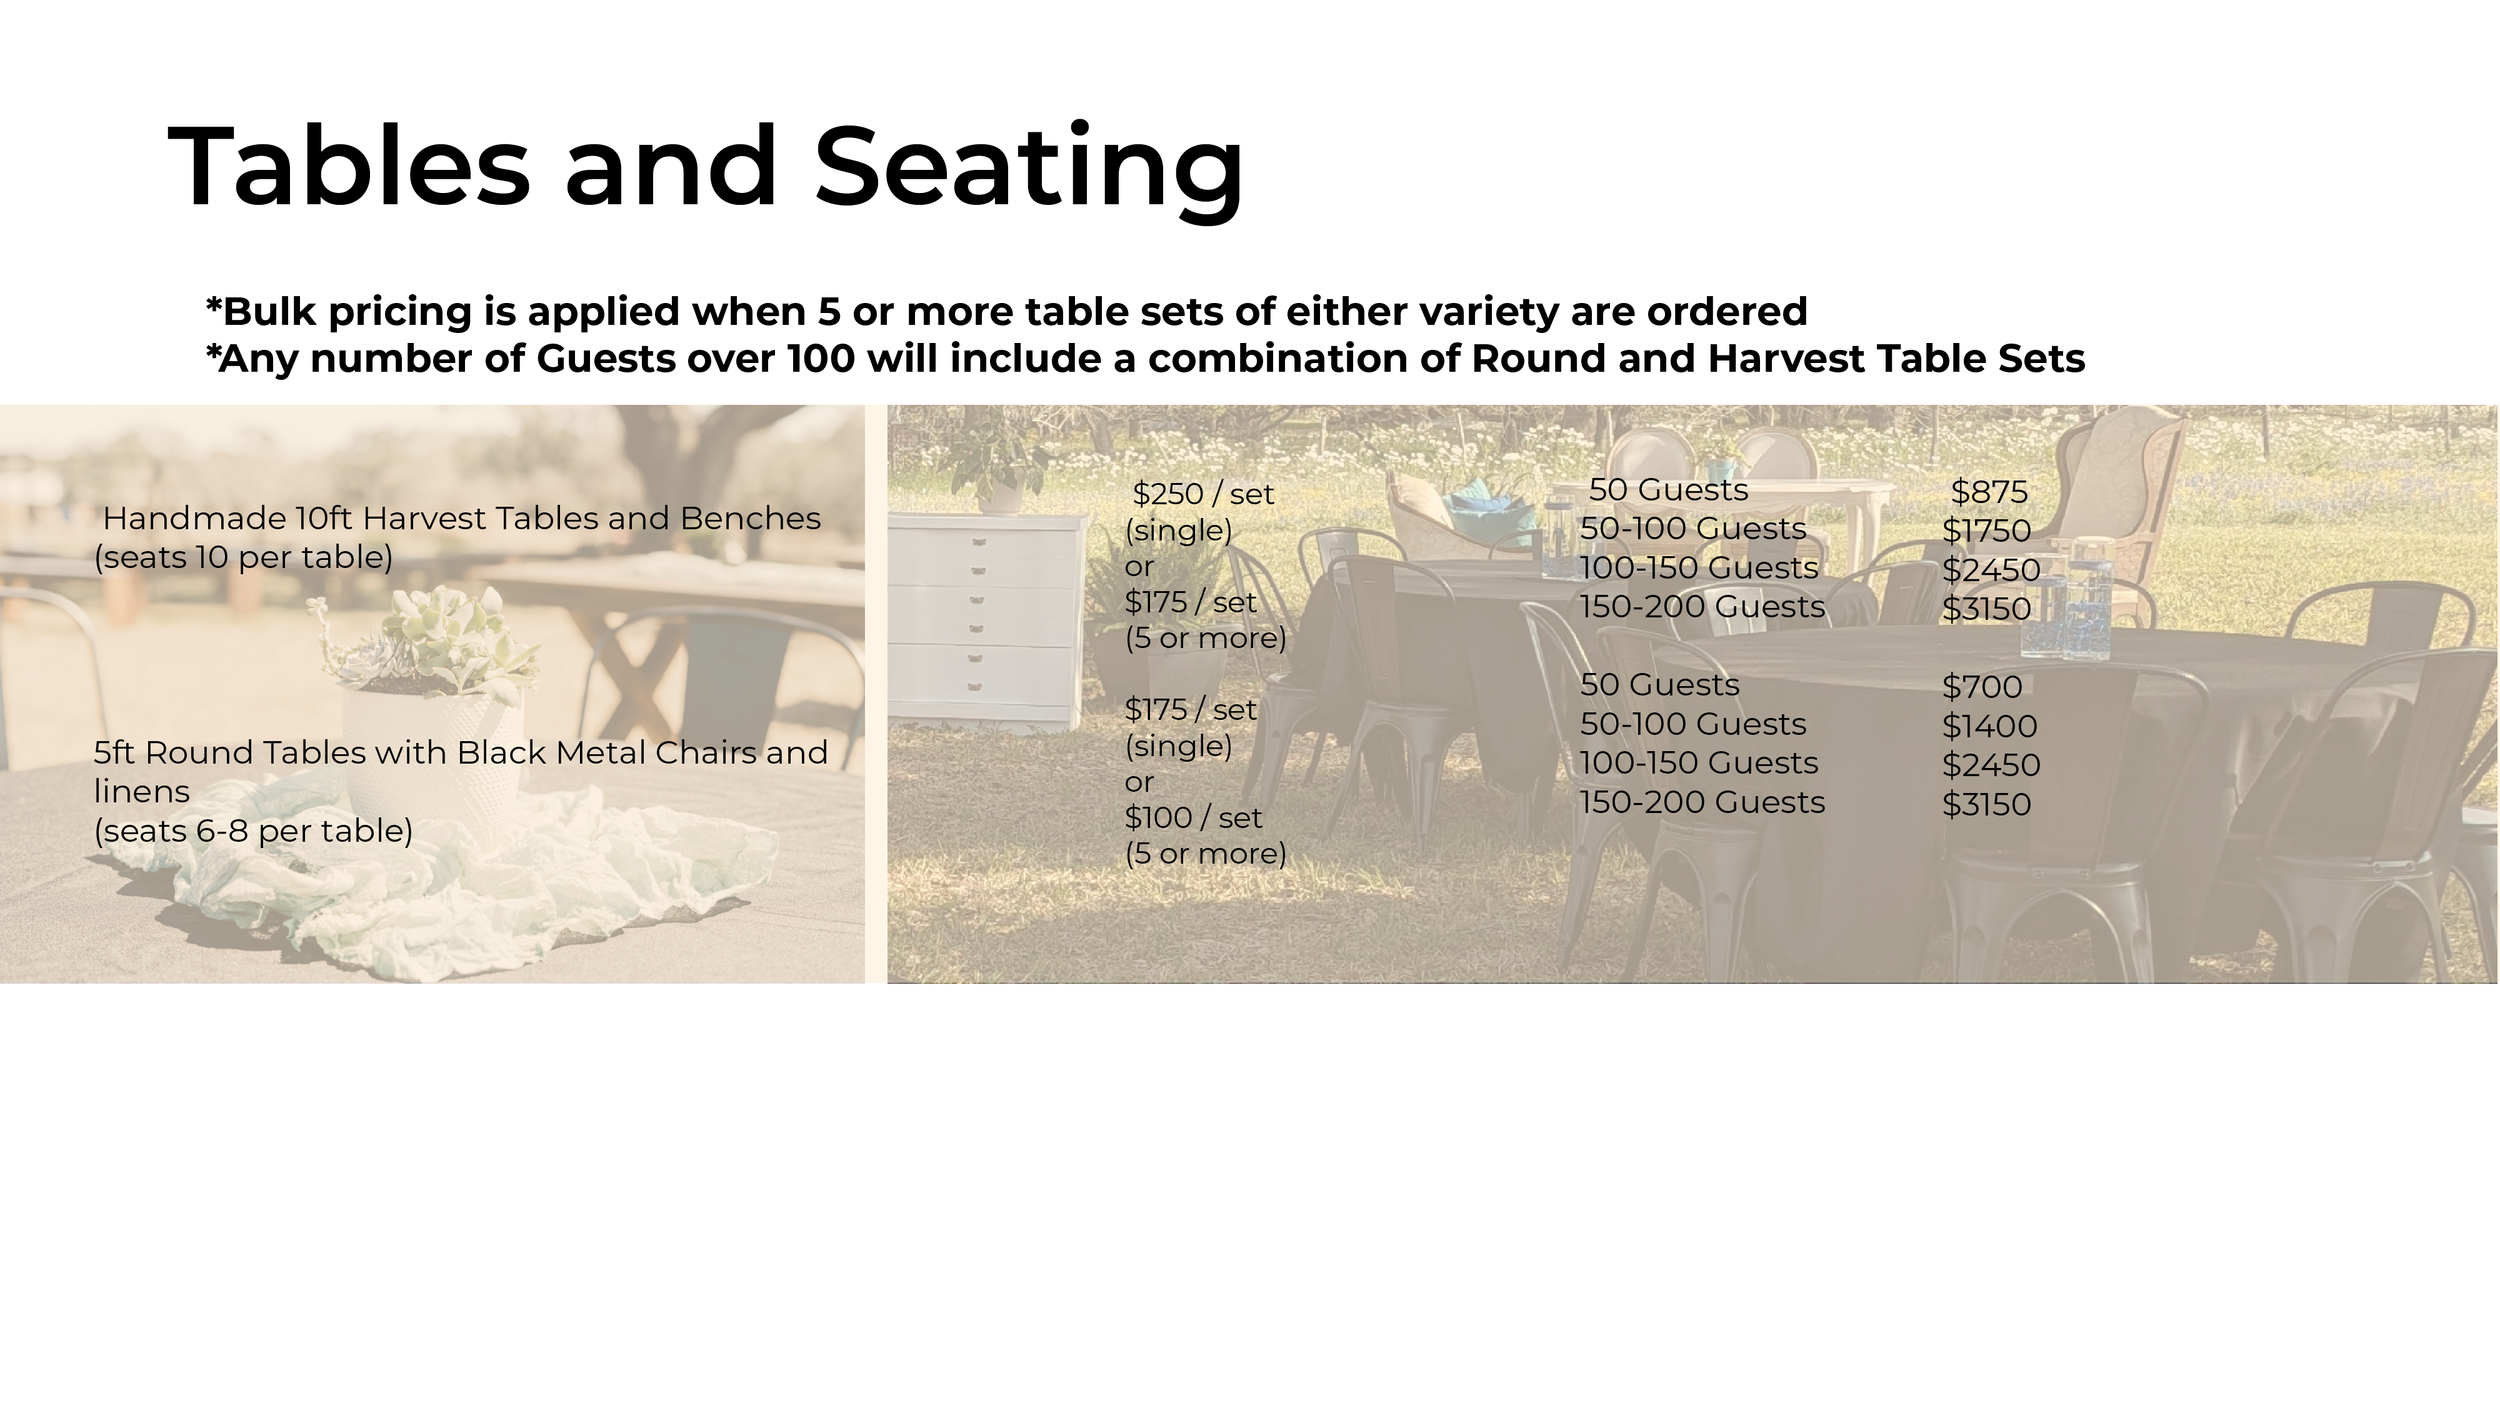 Tables and Seating